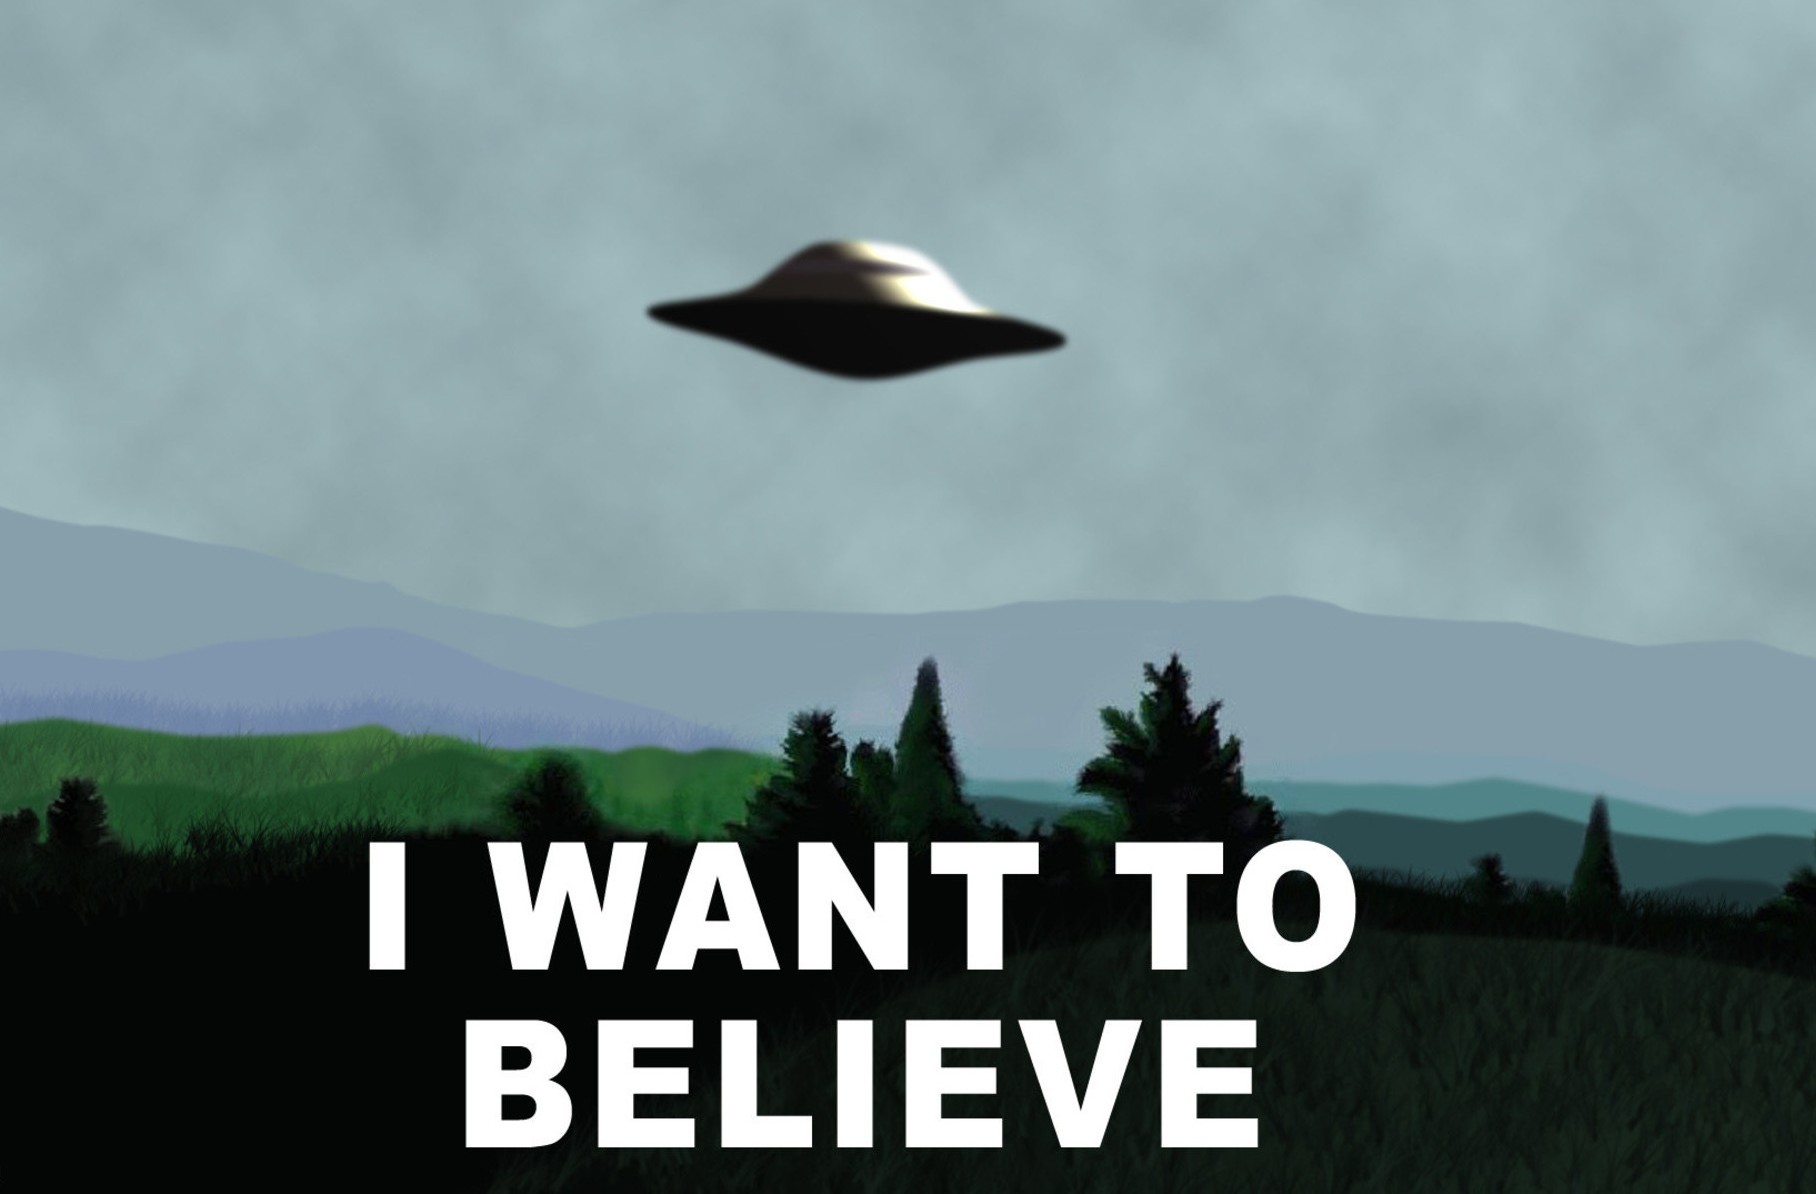 I want a word with you. Плакат секретные материалы i want to believe. I want to believe Постер Малдера. Постер x files i want to believe. Секретные материалы хочу верить плакат.